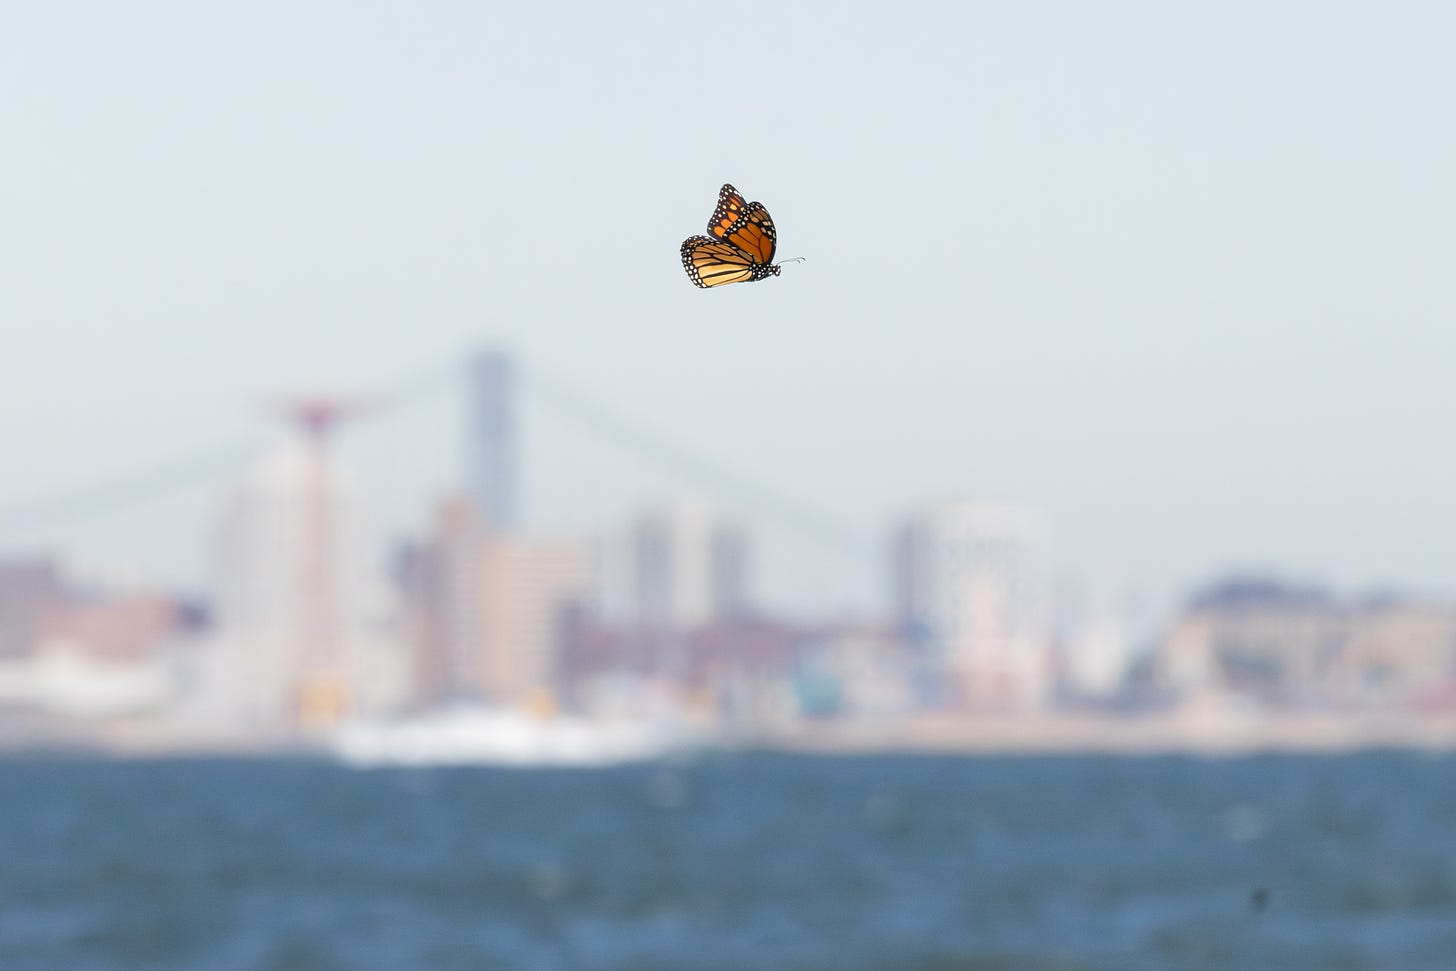 a big orange butterfly with black webbing, flying to the right against a blurry background showing the coney island parachue jump and verazzano narrows bridge.